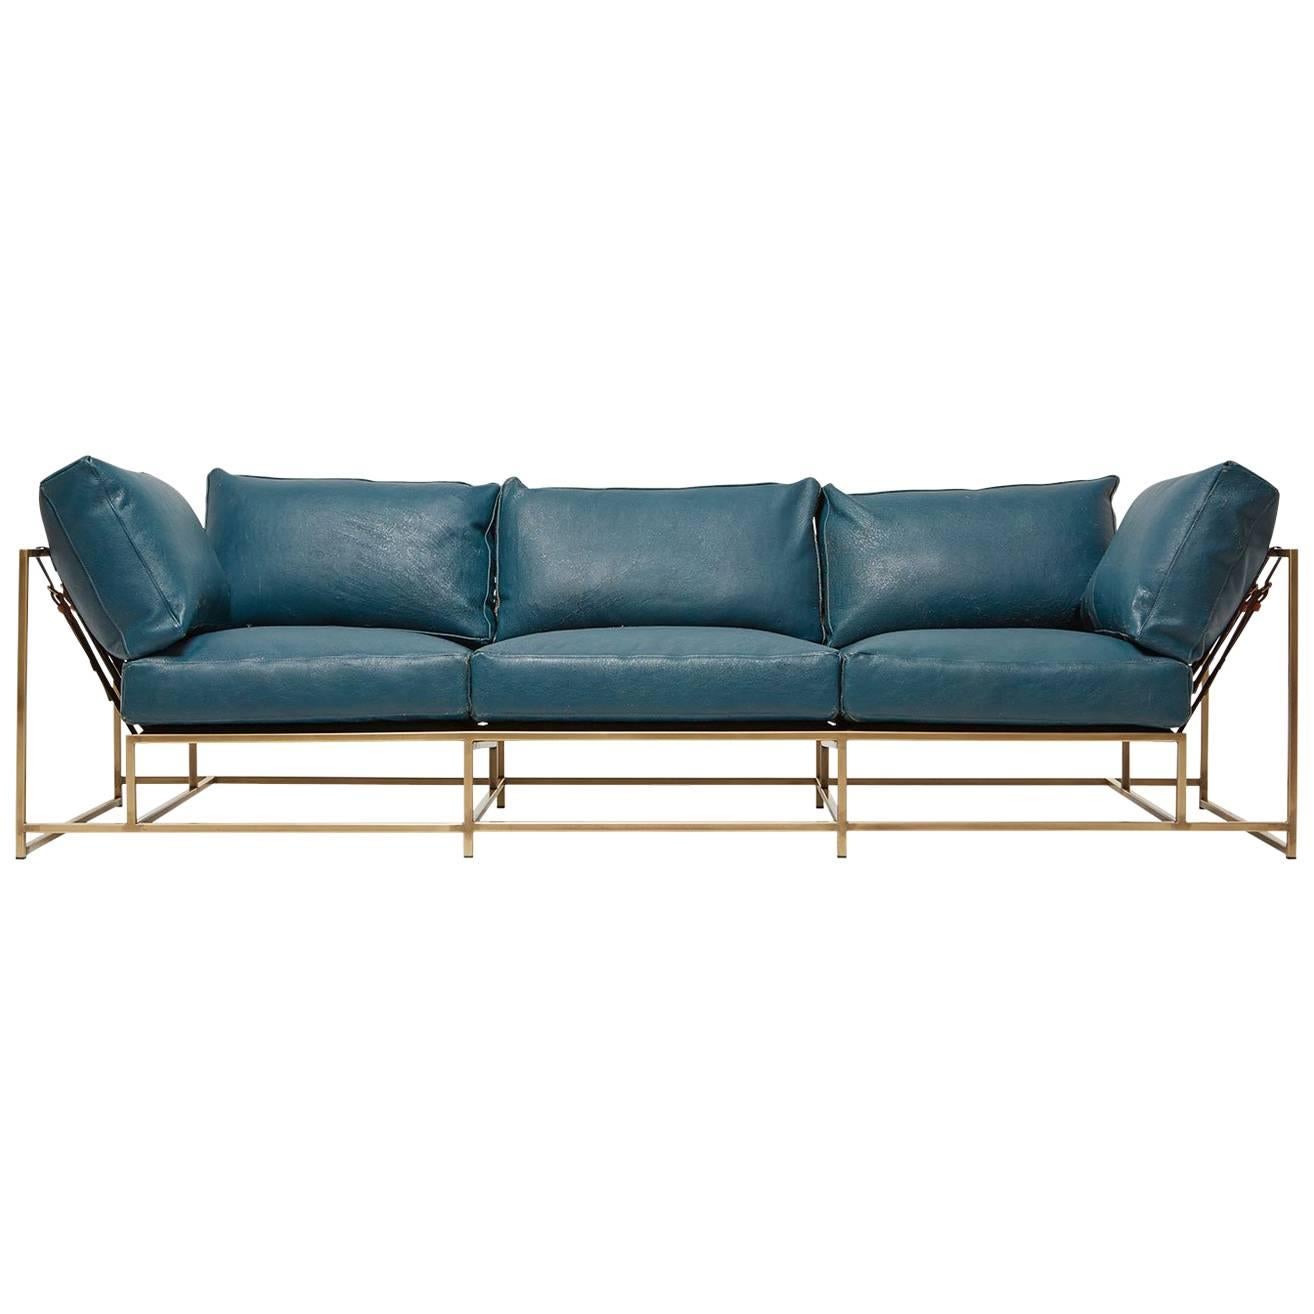 Teal Leather and Light Antique Brass Sofa For Sale